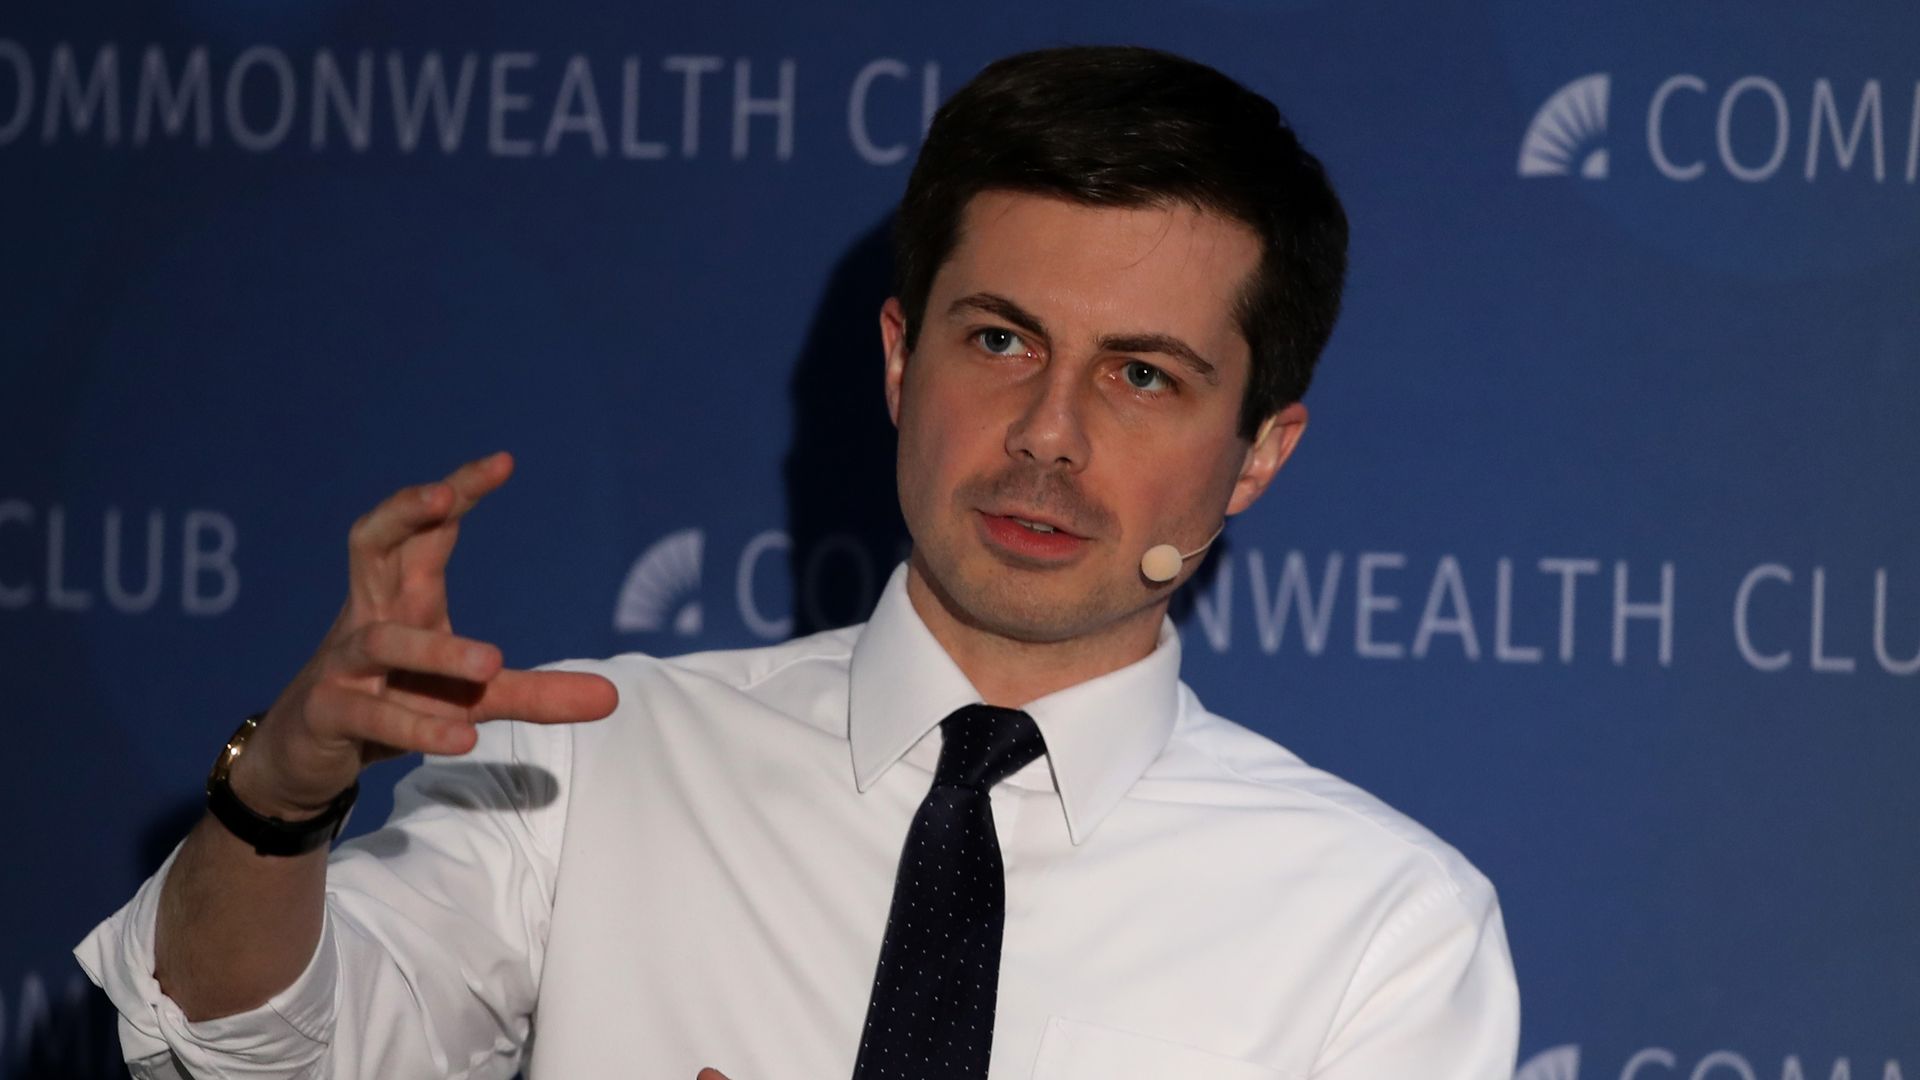 Pete Buttigieg says the U.S. can lead on human rights.